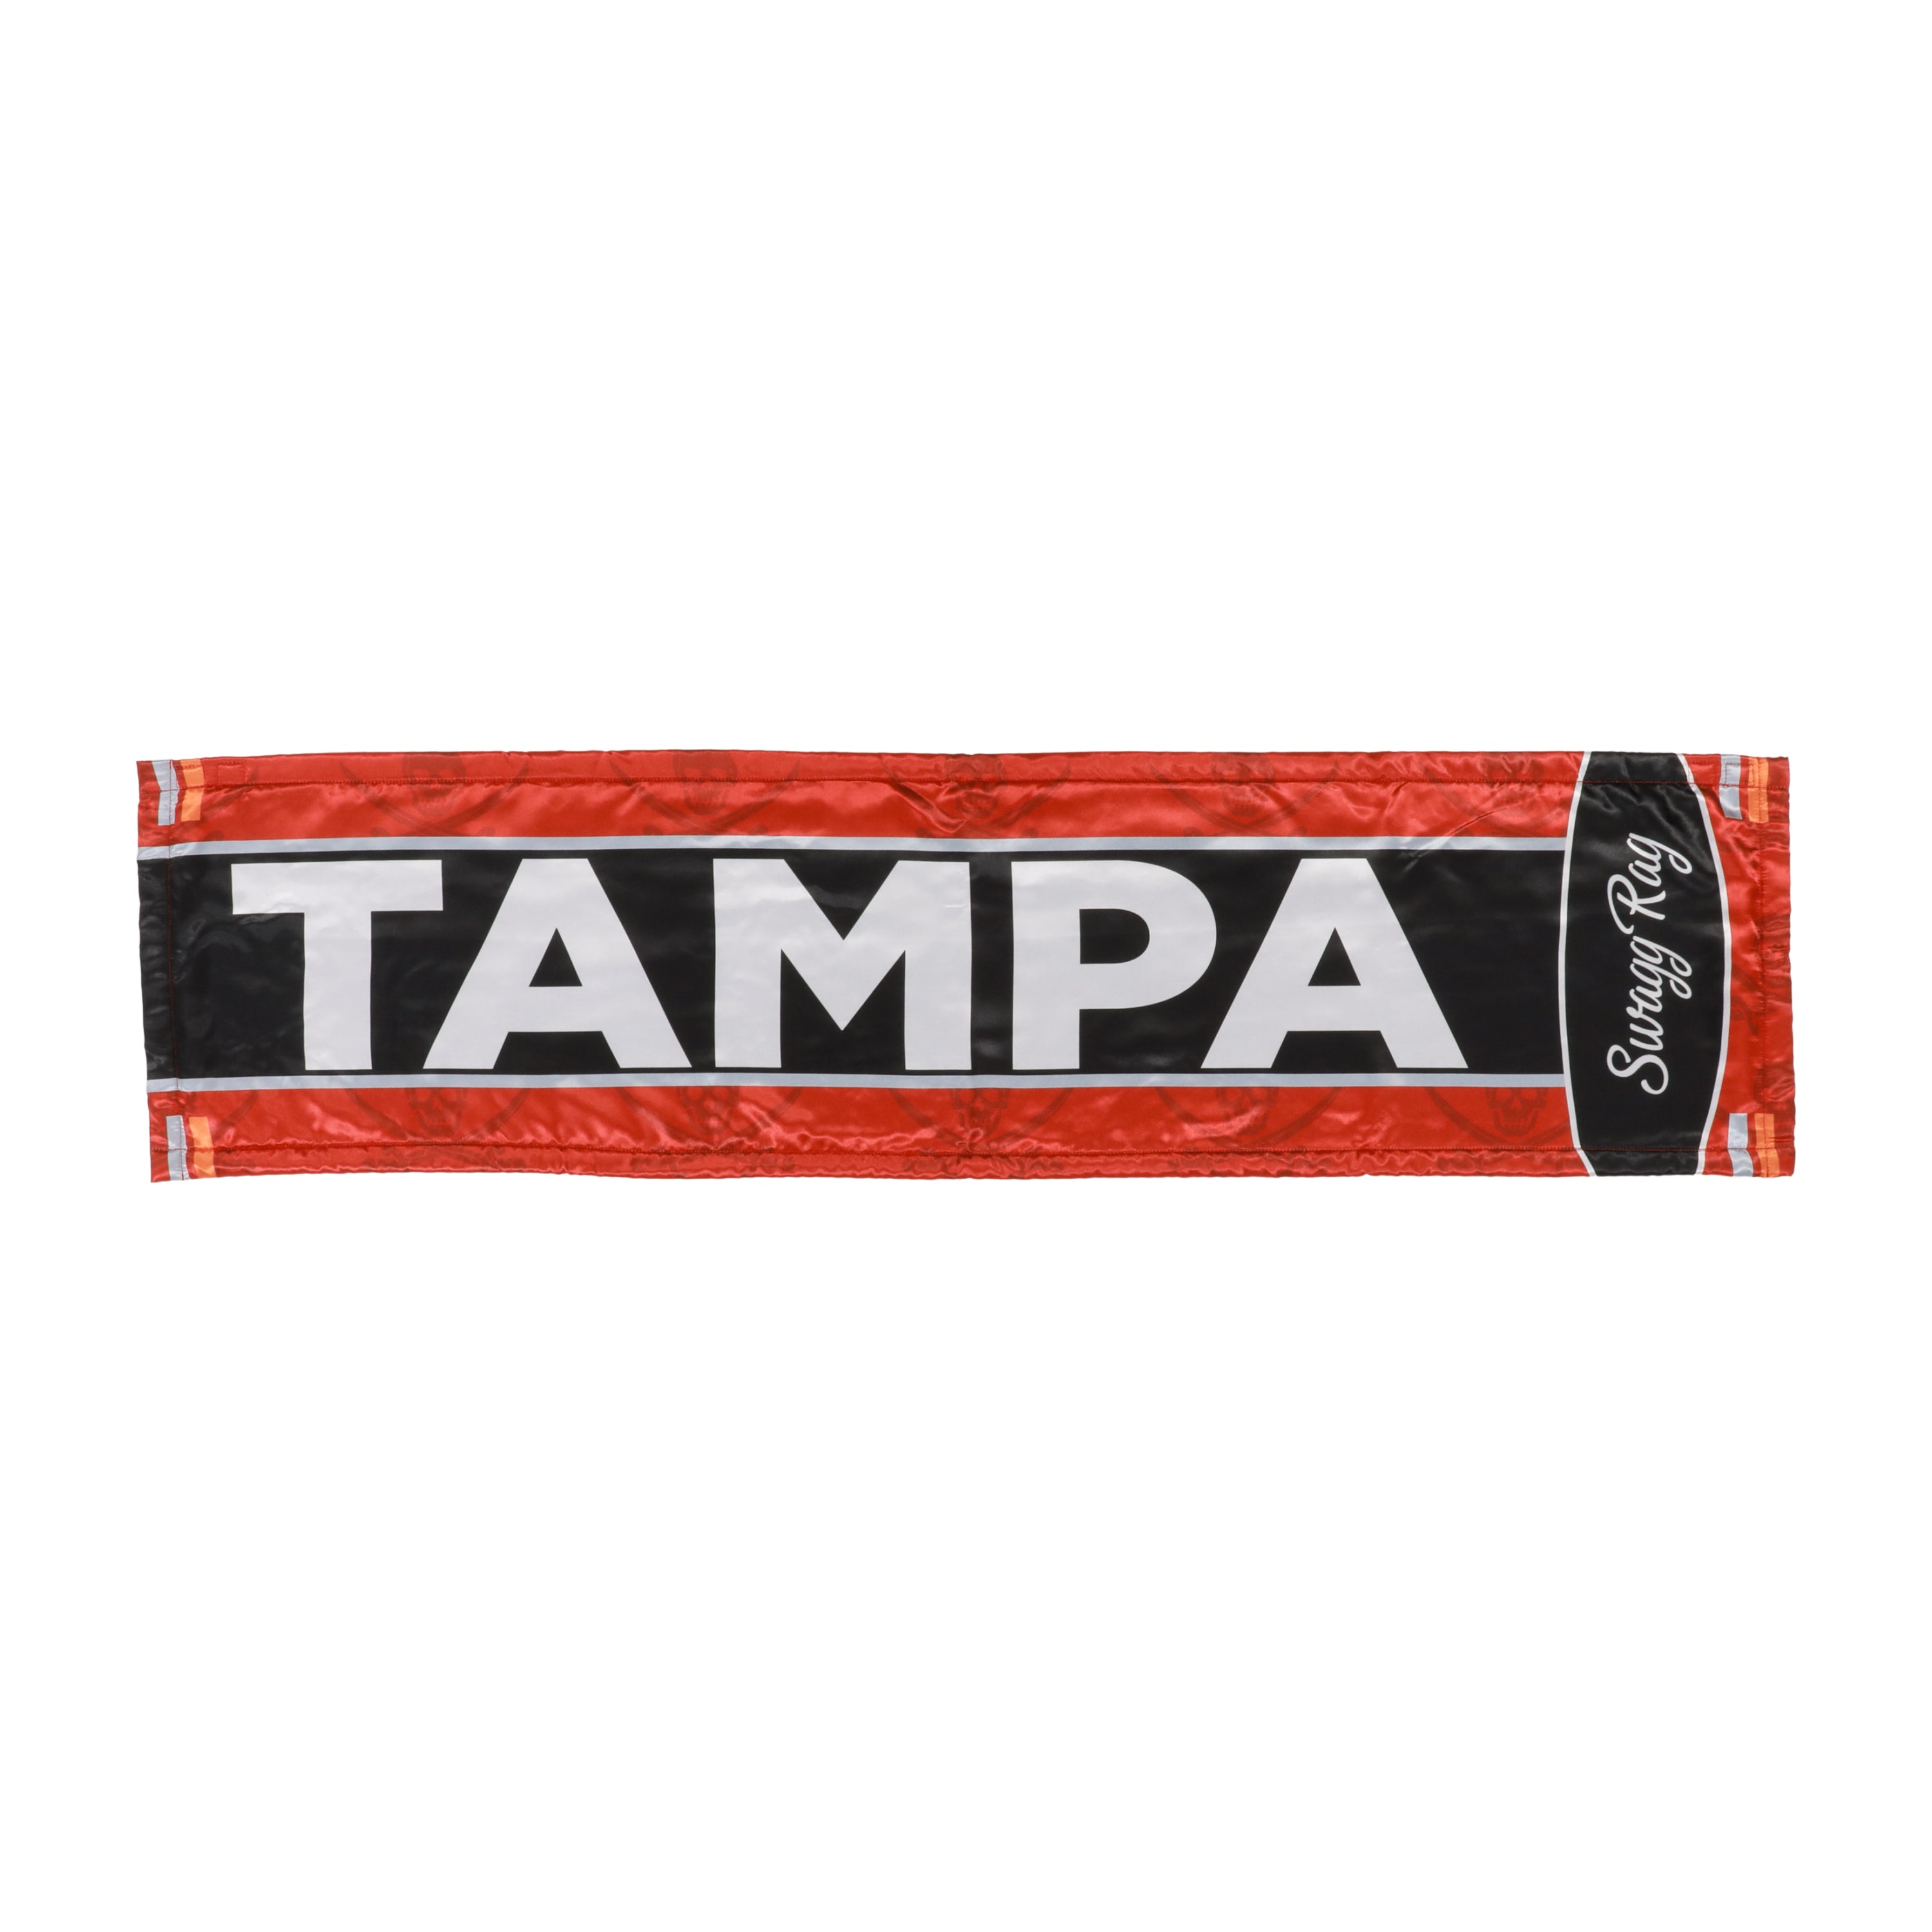 Tampa Swagg Rag